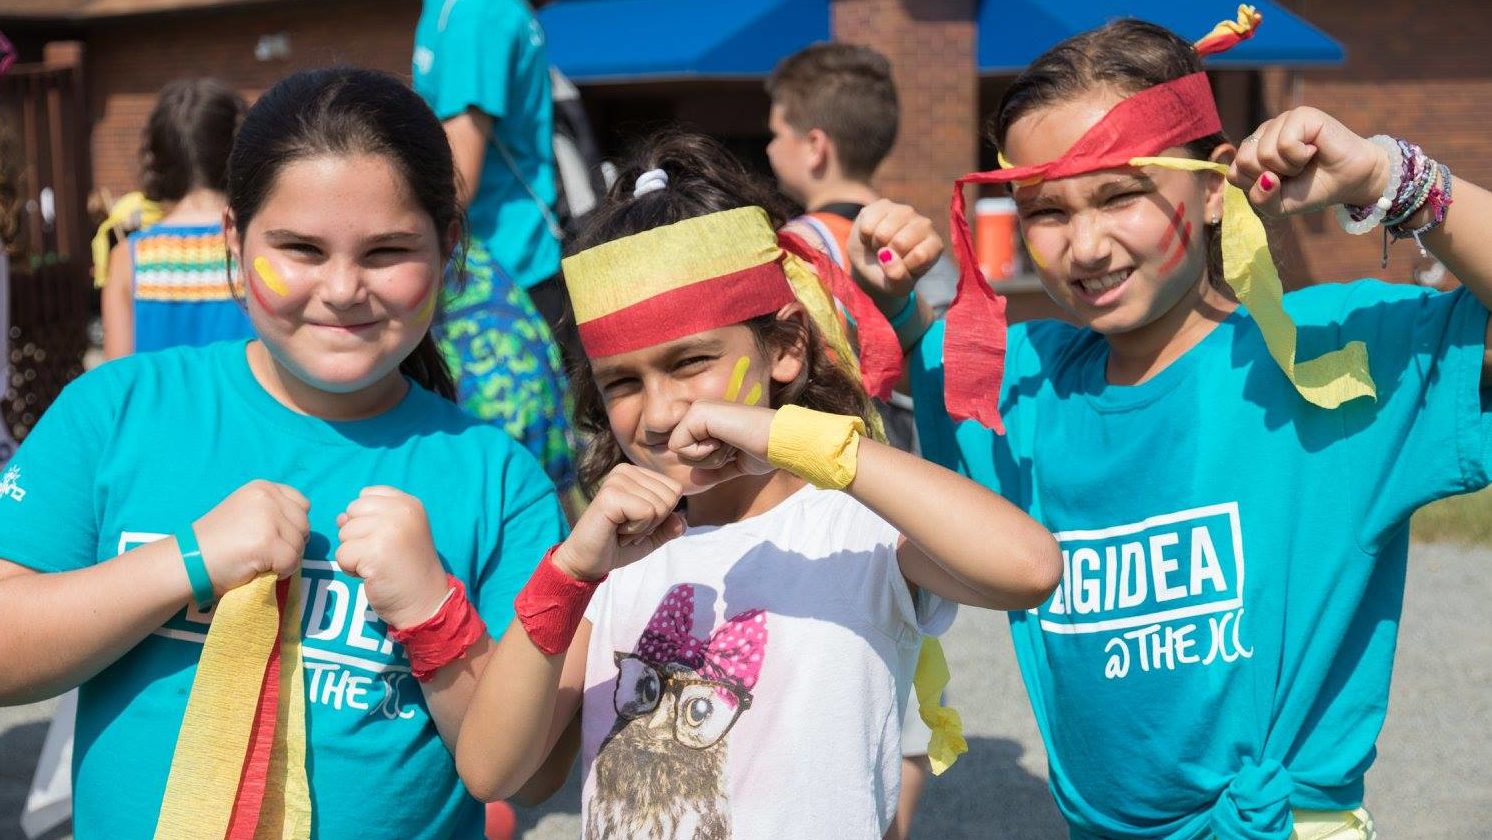 Kids’ Camps in Israel Gear Up for Post-Pandemic Summer of Fun